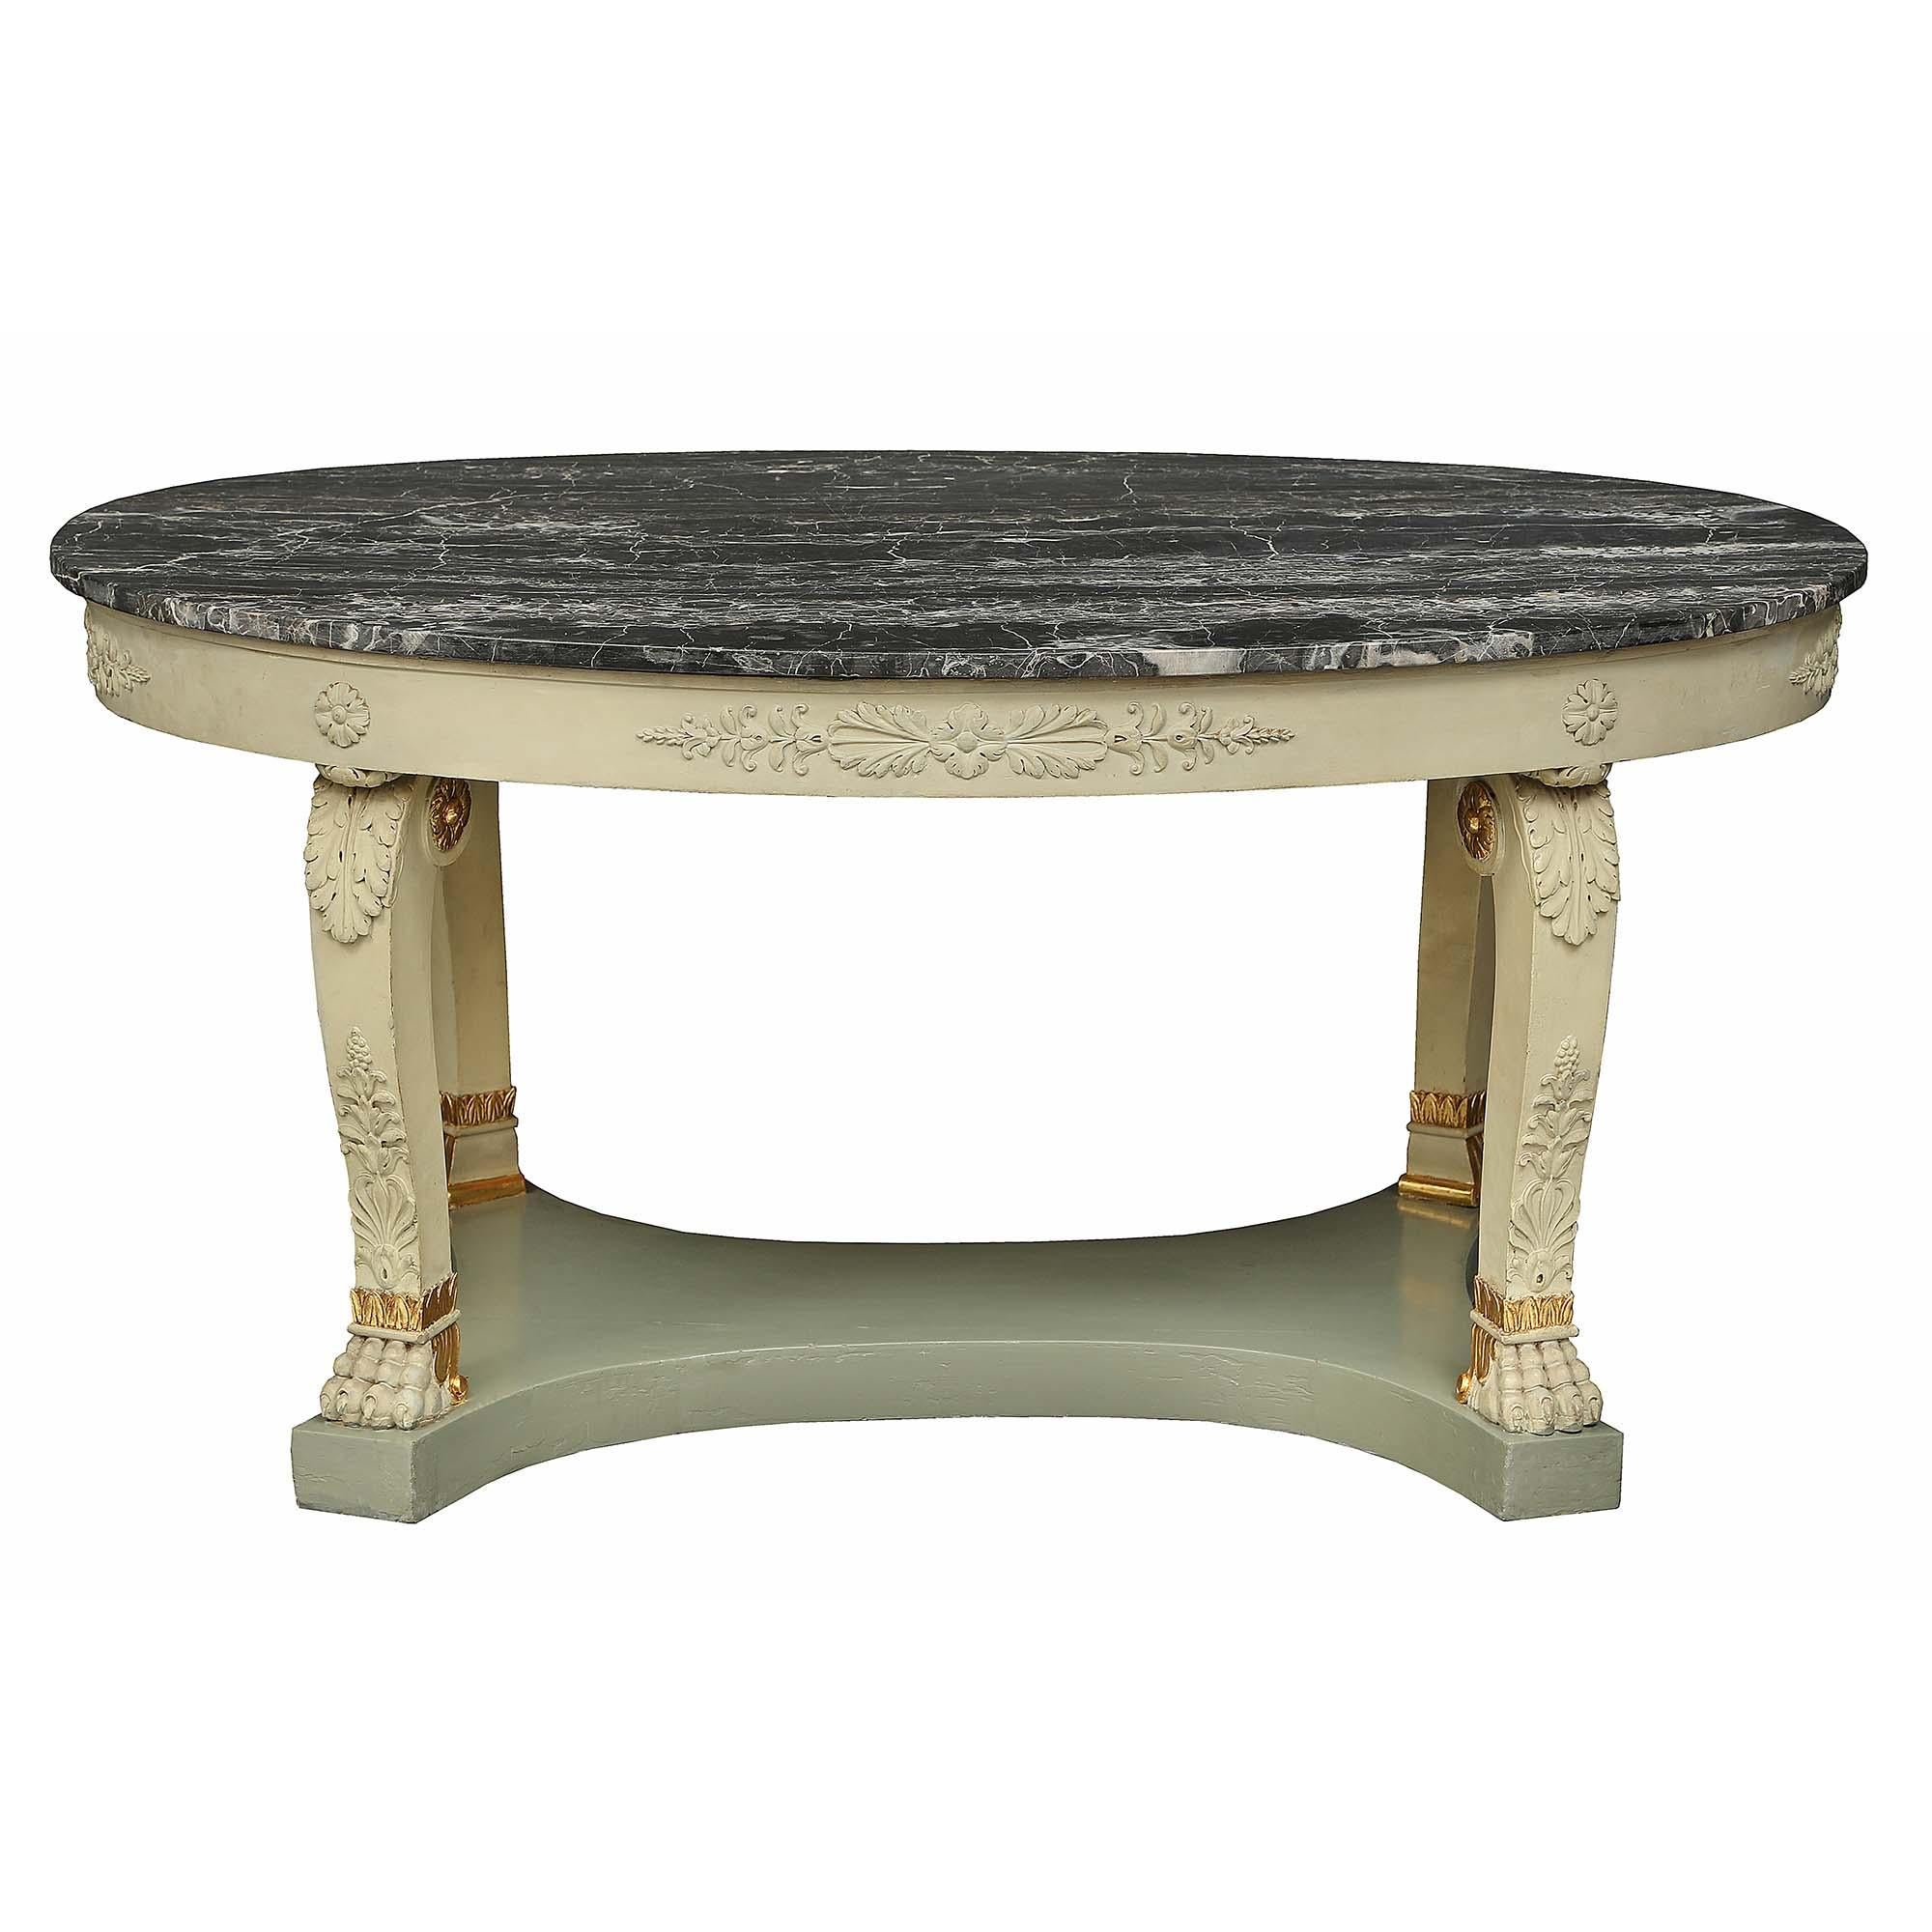 A wonderful and decorative Italian 19th century neo-classical st. patinated and marble oval center table. The table is raised by a bottom tier with concave sides and four square scrolled legs with handsome paw feet. The supports are decorated with